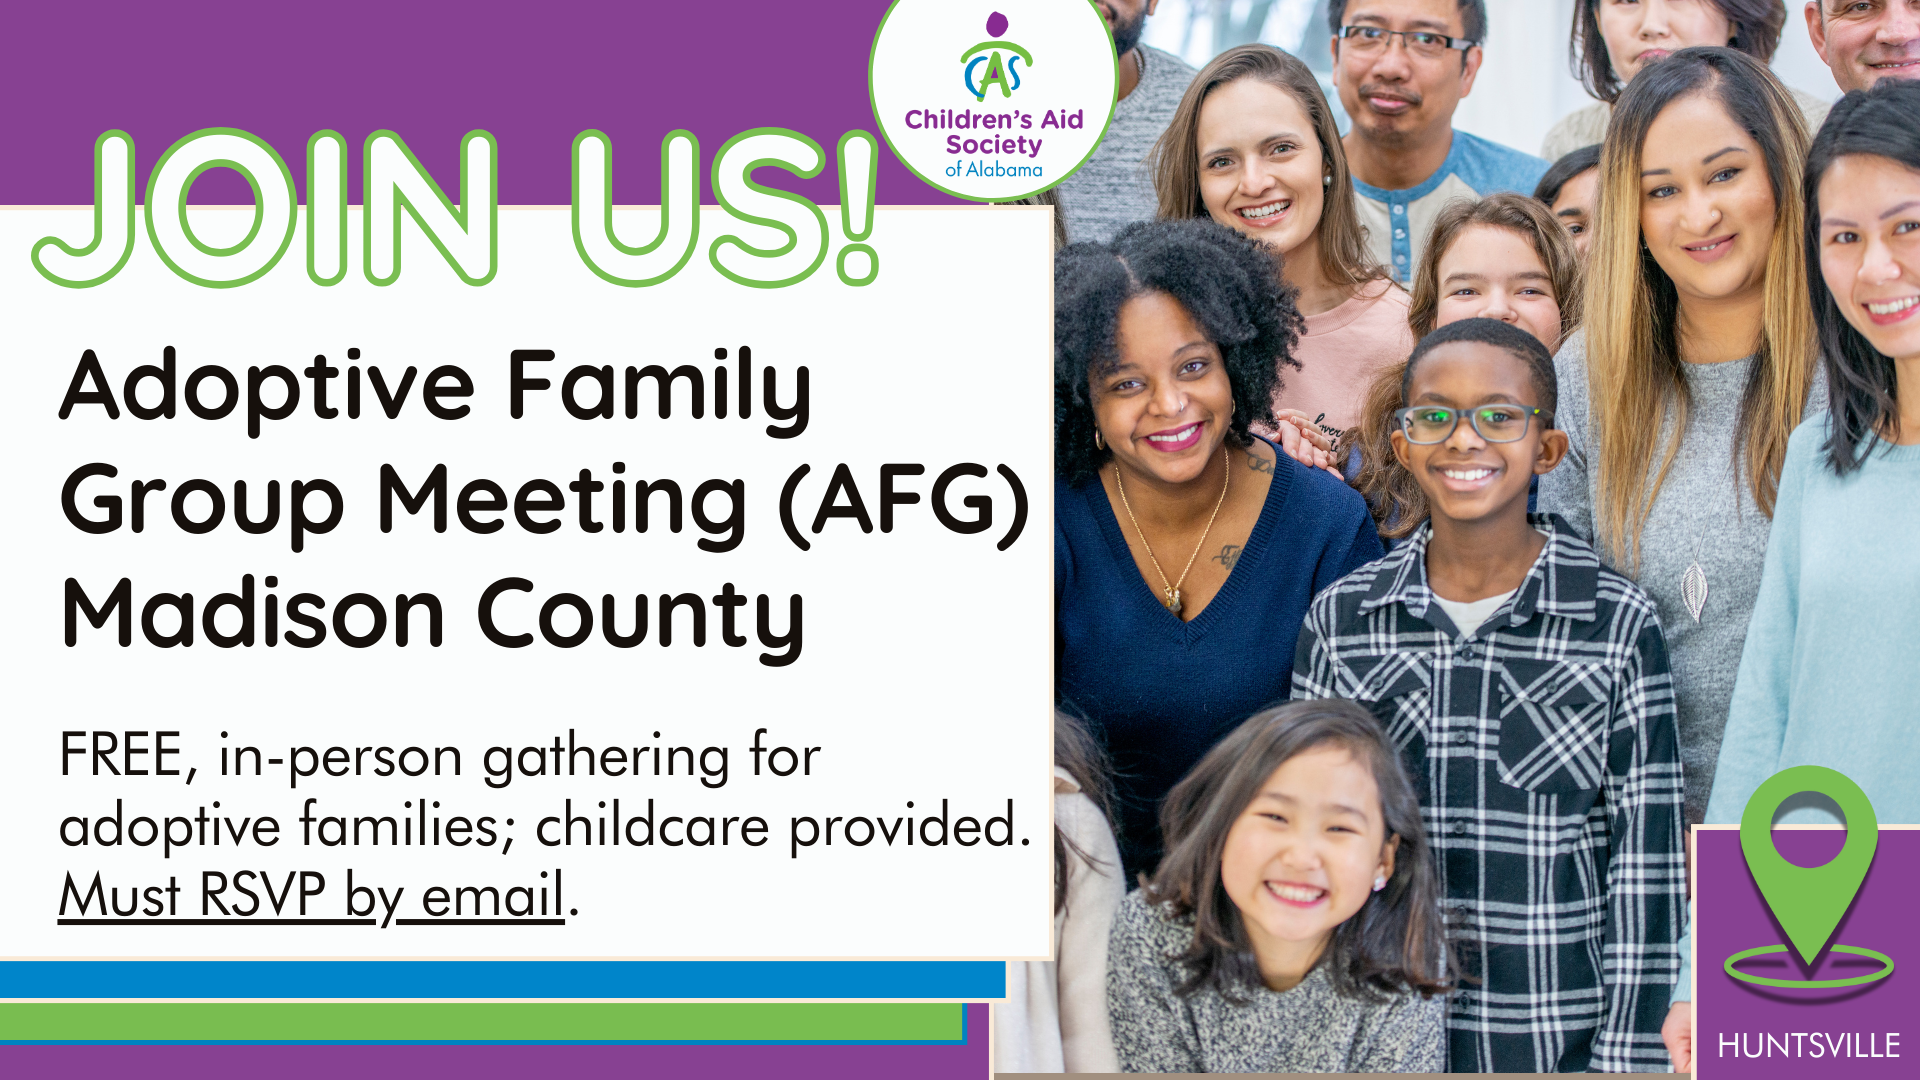 Children's Aid Society of Alabama's FREE adoptive family group meetings in Madison county, AL. Free childcare provided, must RSVP by email.